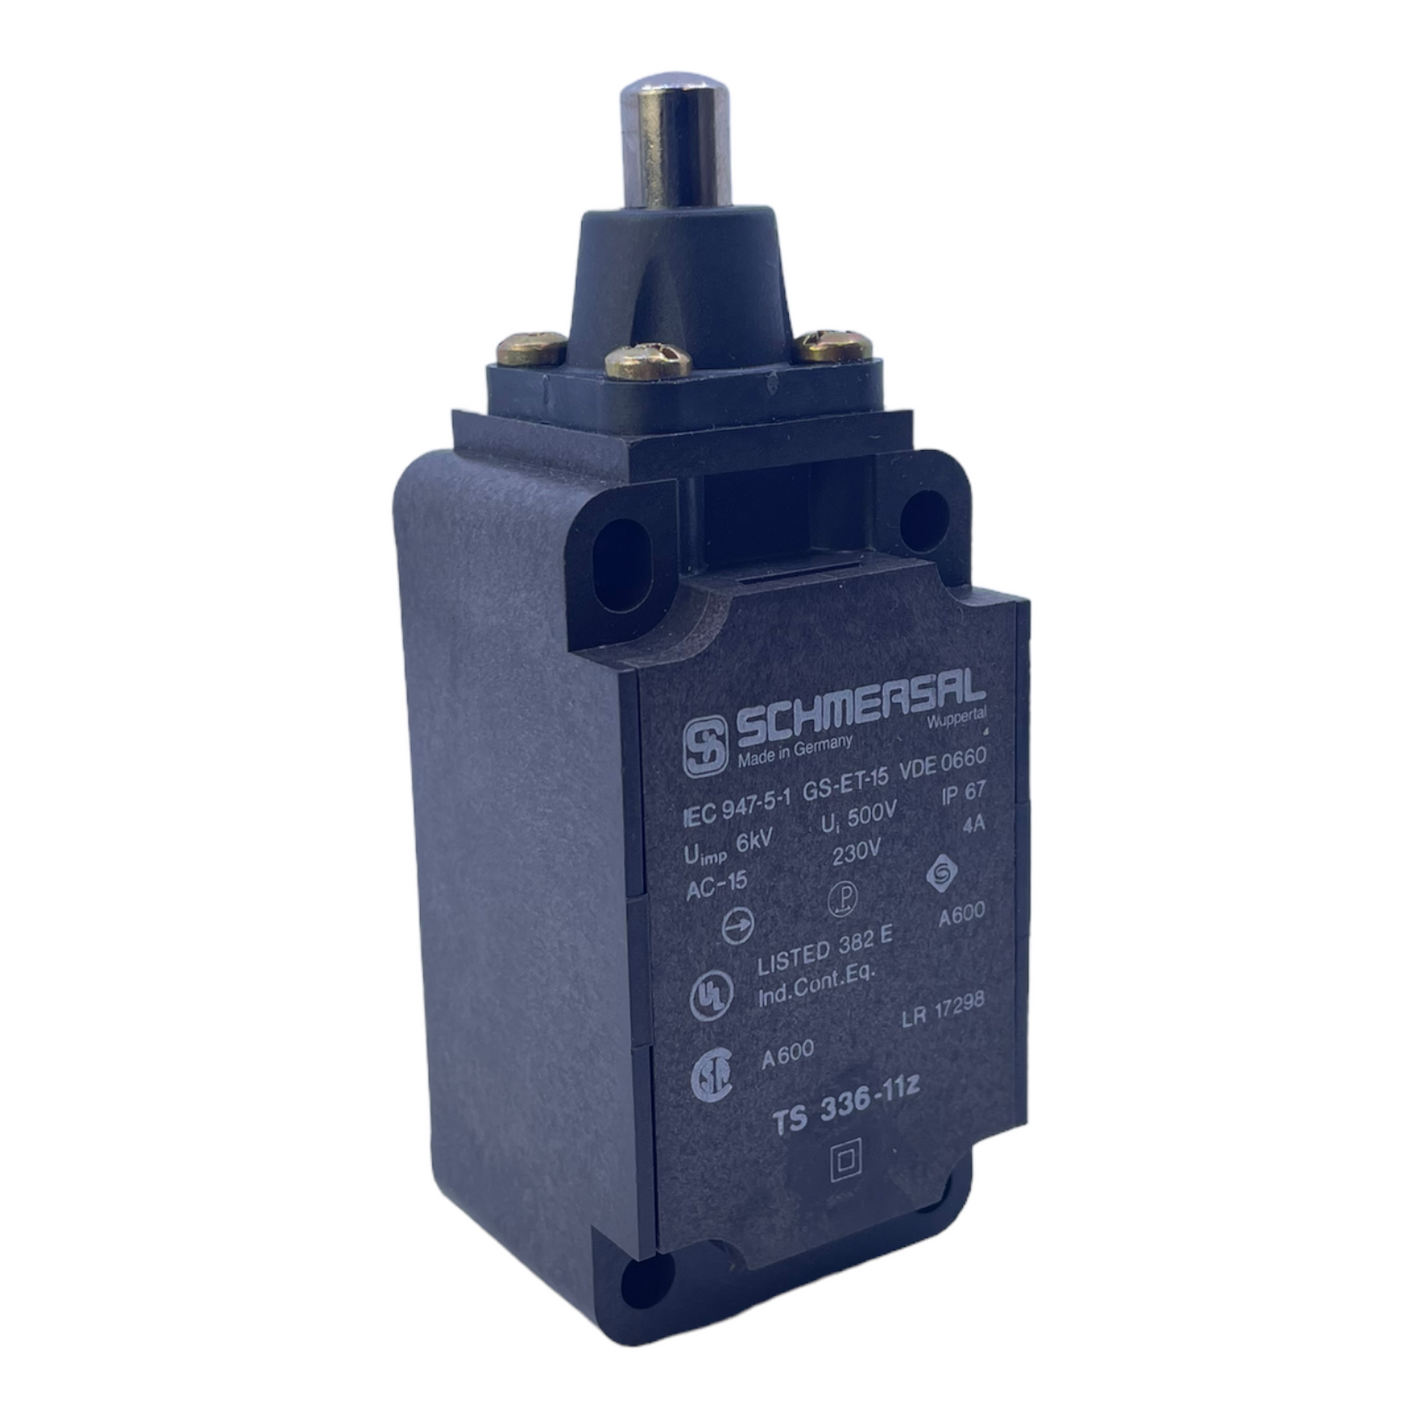 Schmersal TS336-11z safety switch for industrial use 230V 4A 6kV